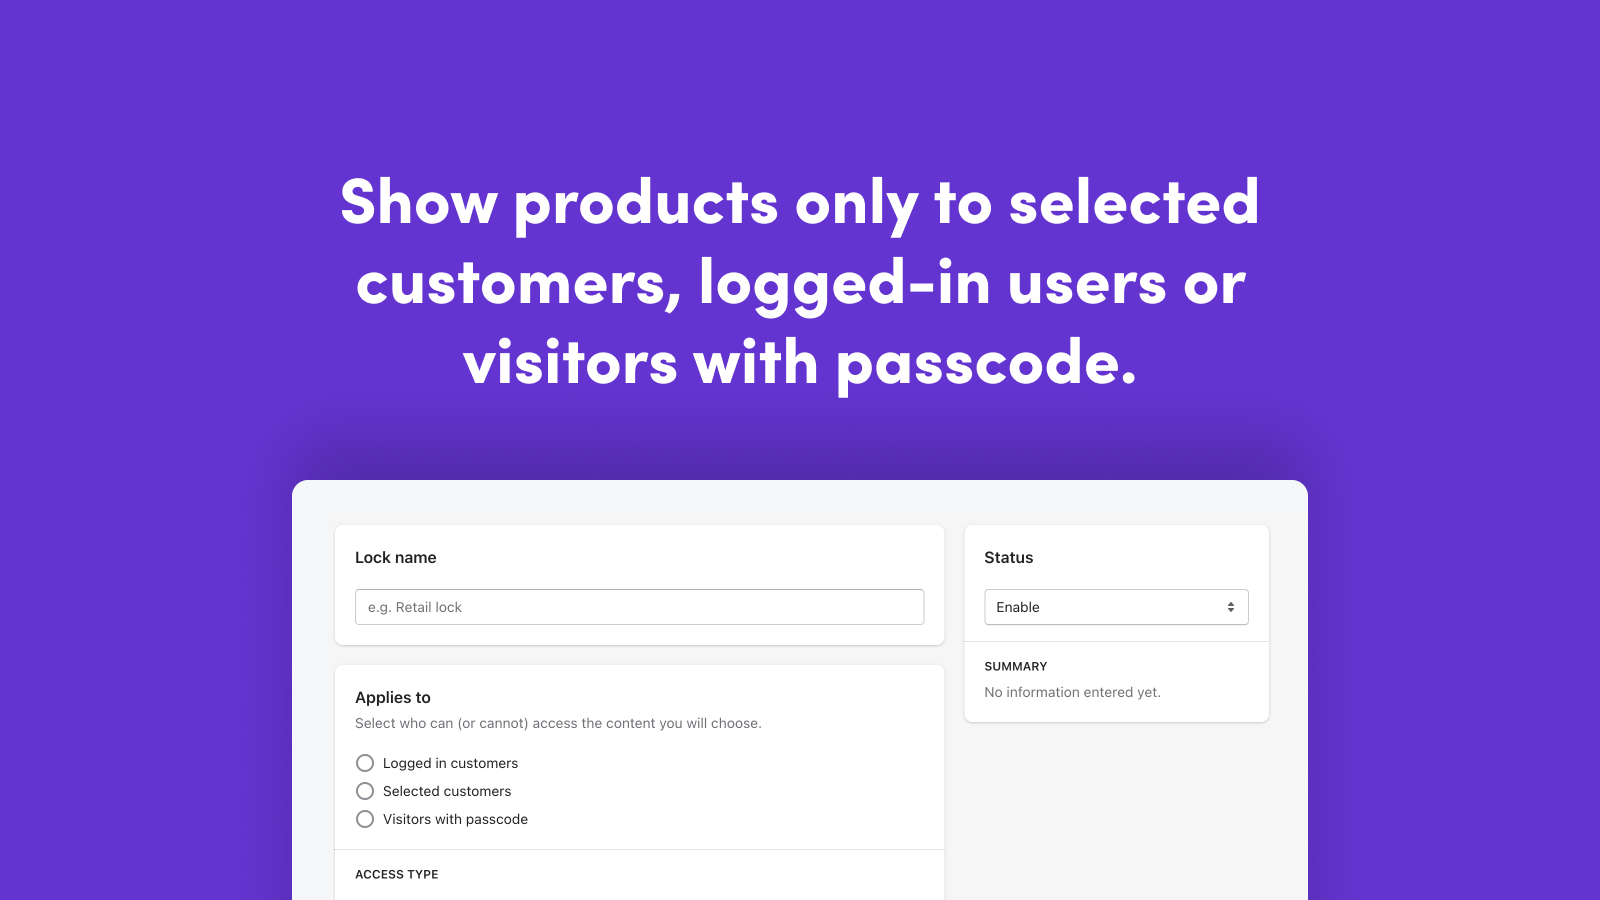 Show products only to selected customers, logged in users, etc.